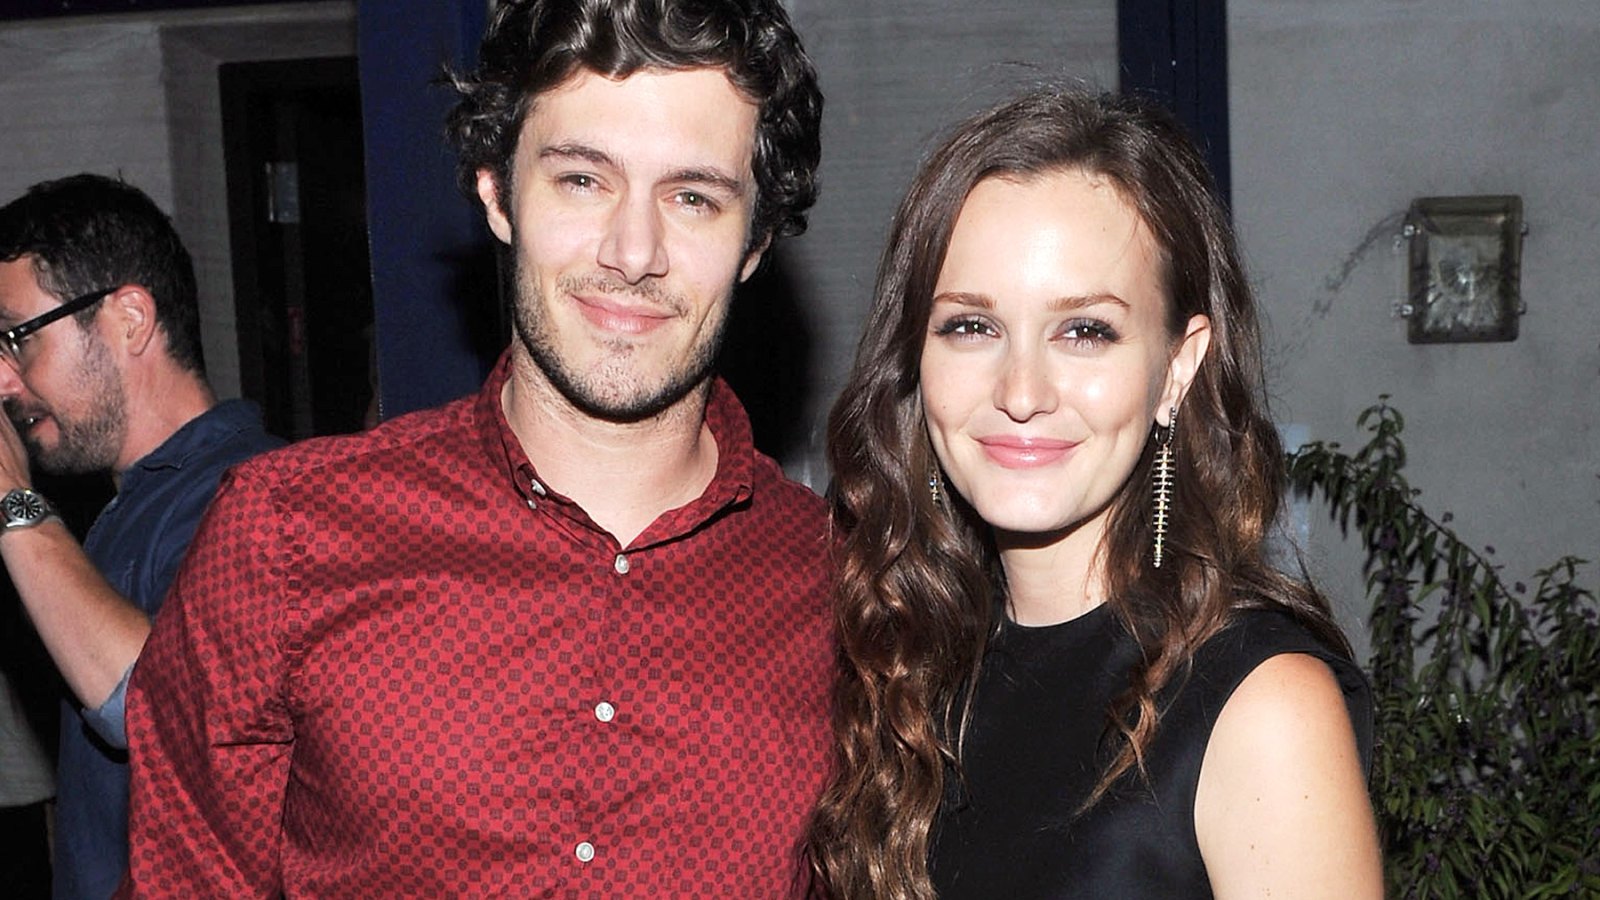 Adam Brody and Leighton Meester on September 14, 2012 in New York City